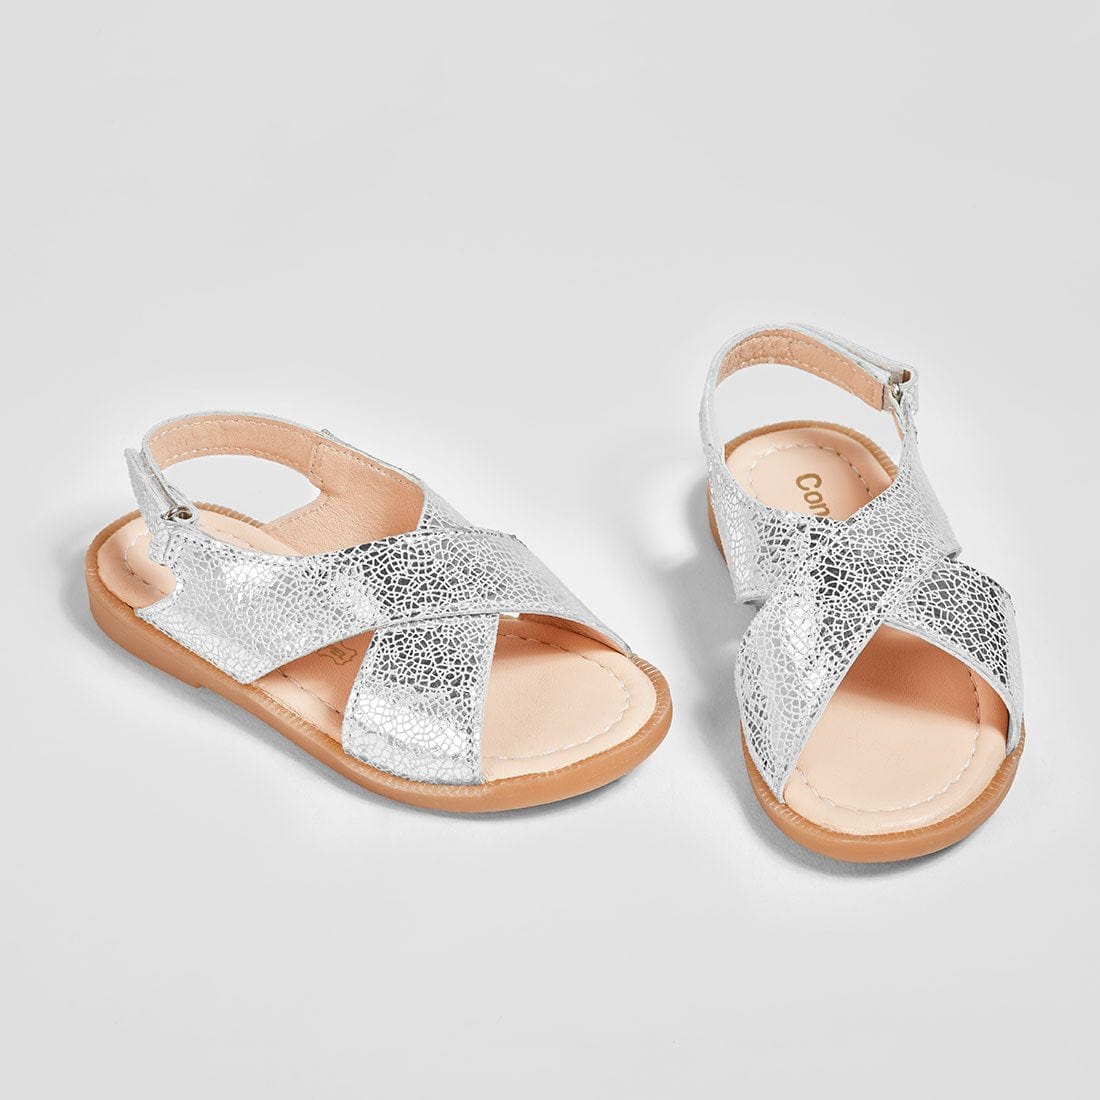 CONGUITOS Shoes Girl's Silver Crossed Straps Leather Sandals